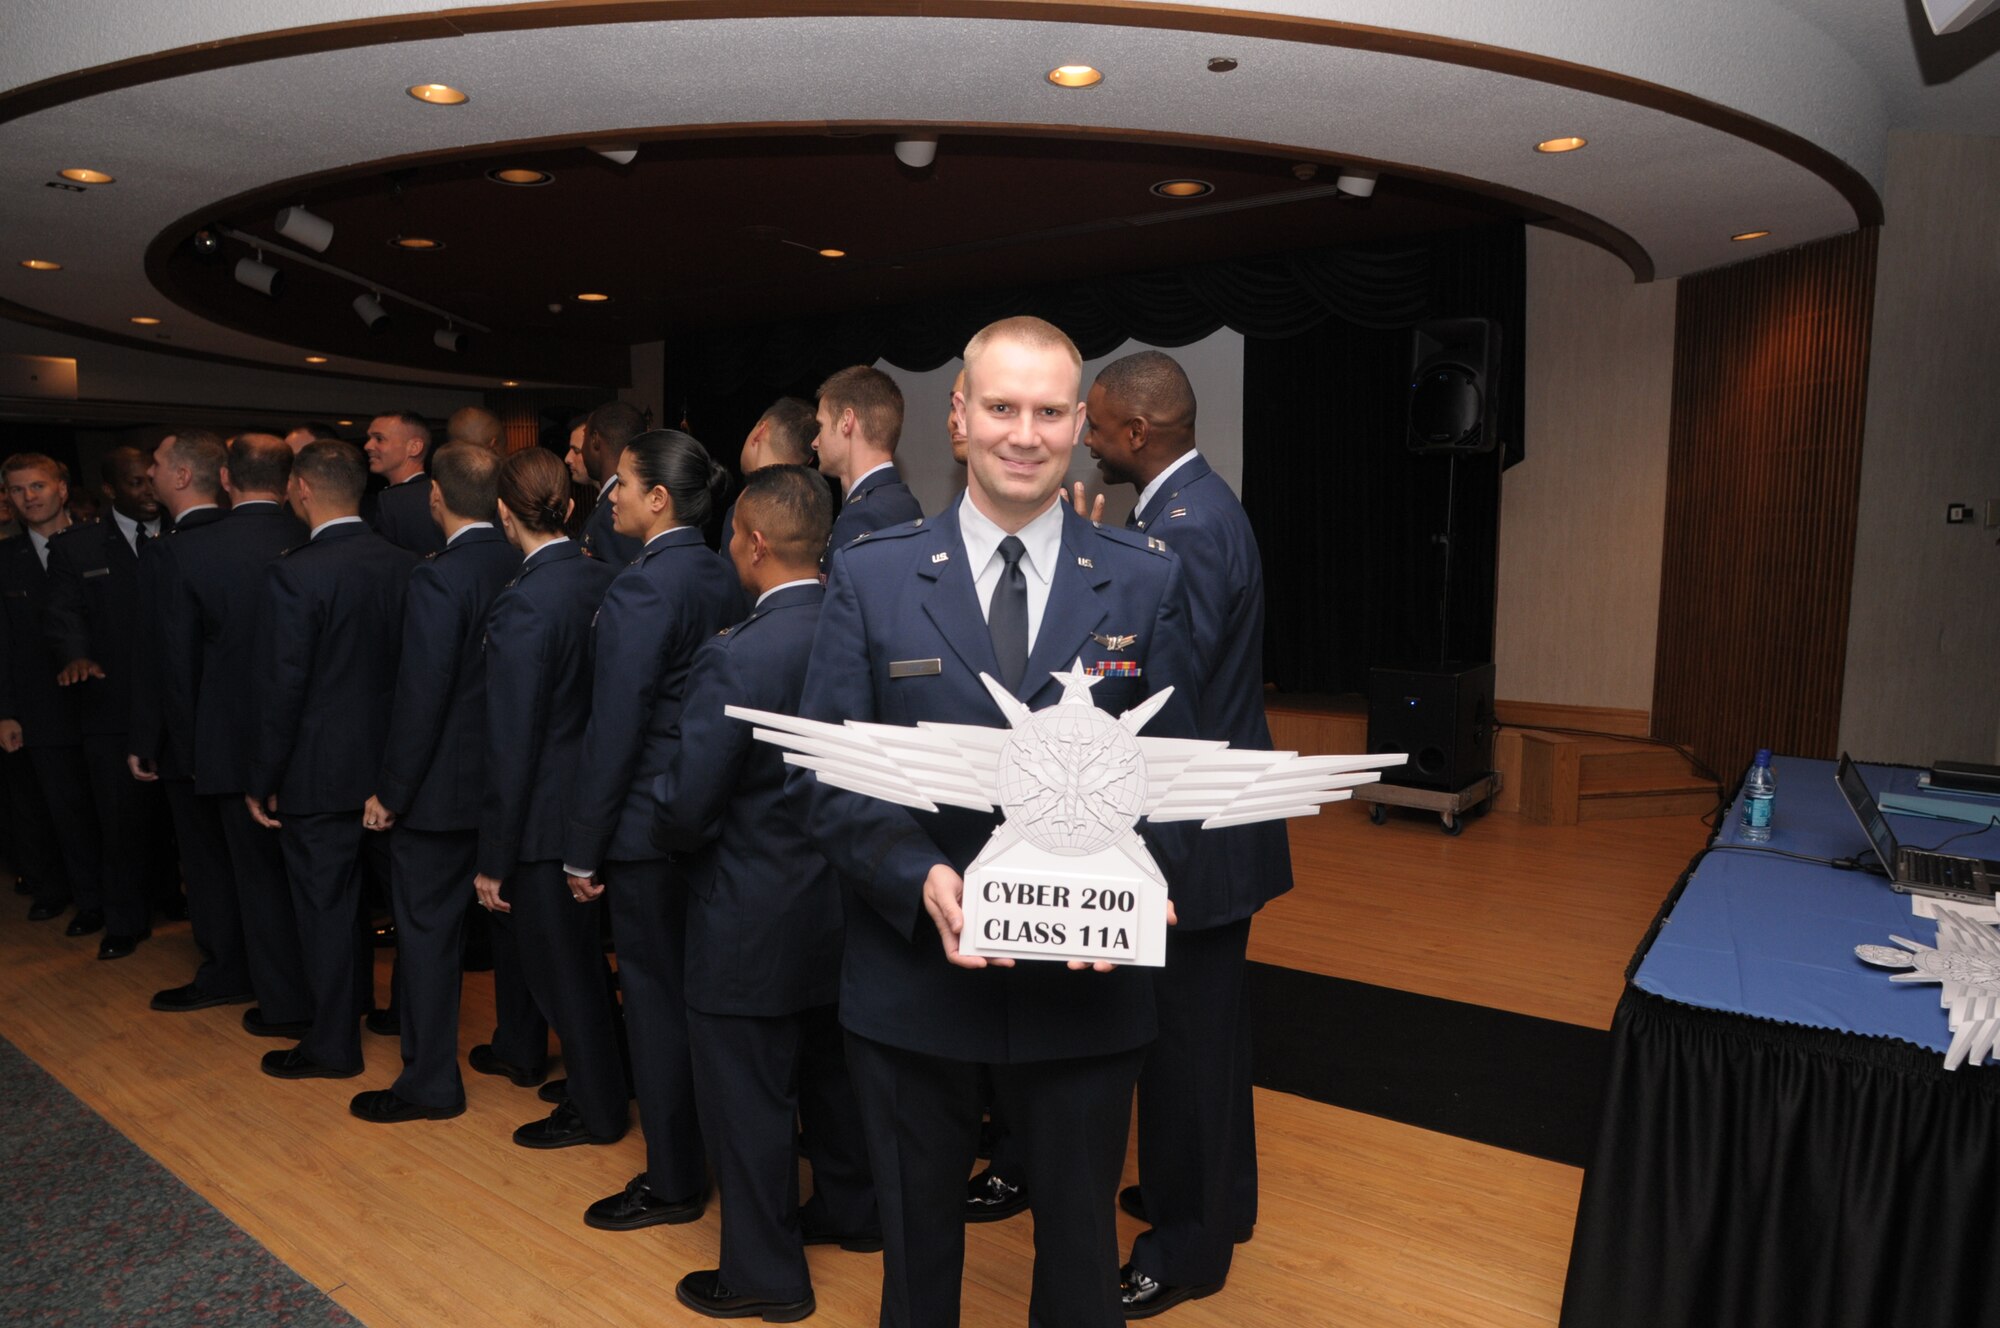 Capt Travis Tubbs, class leader for the first Air Force Institute of Technology Cyber 200 class, holds the new Air Force cyberspace operator badge during graduation ceremonies, Oct. 28, 2010, at Wright-Patterson Air Force Base, Ohio.  (U.S. Air Force photo/Al Bright)